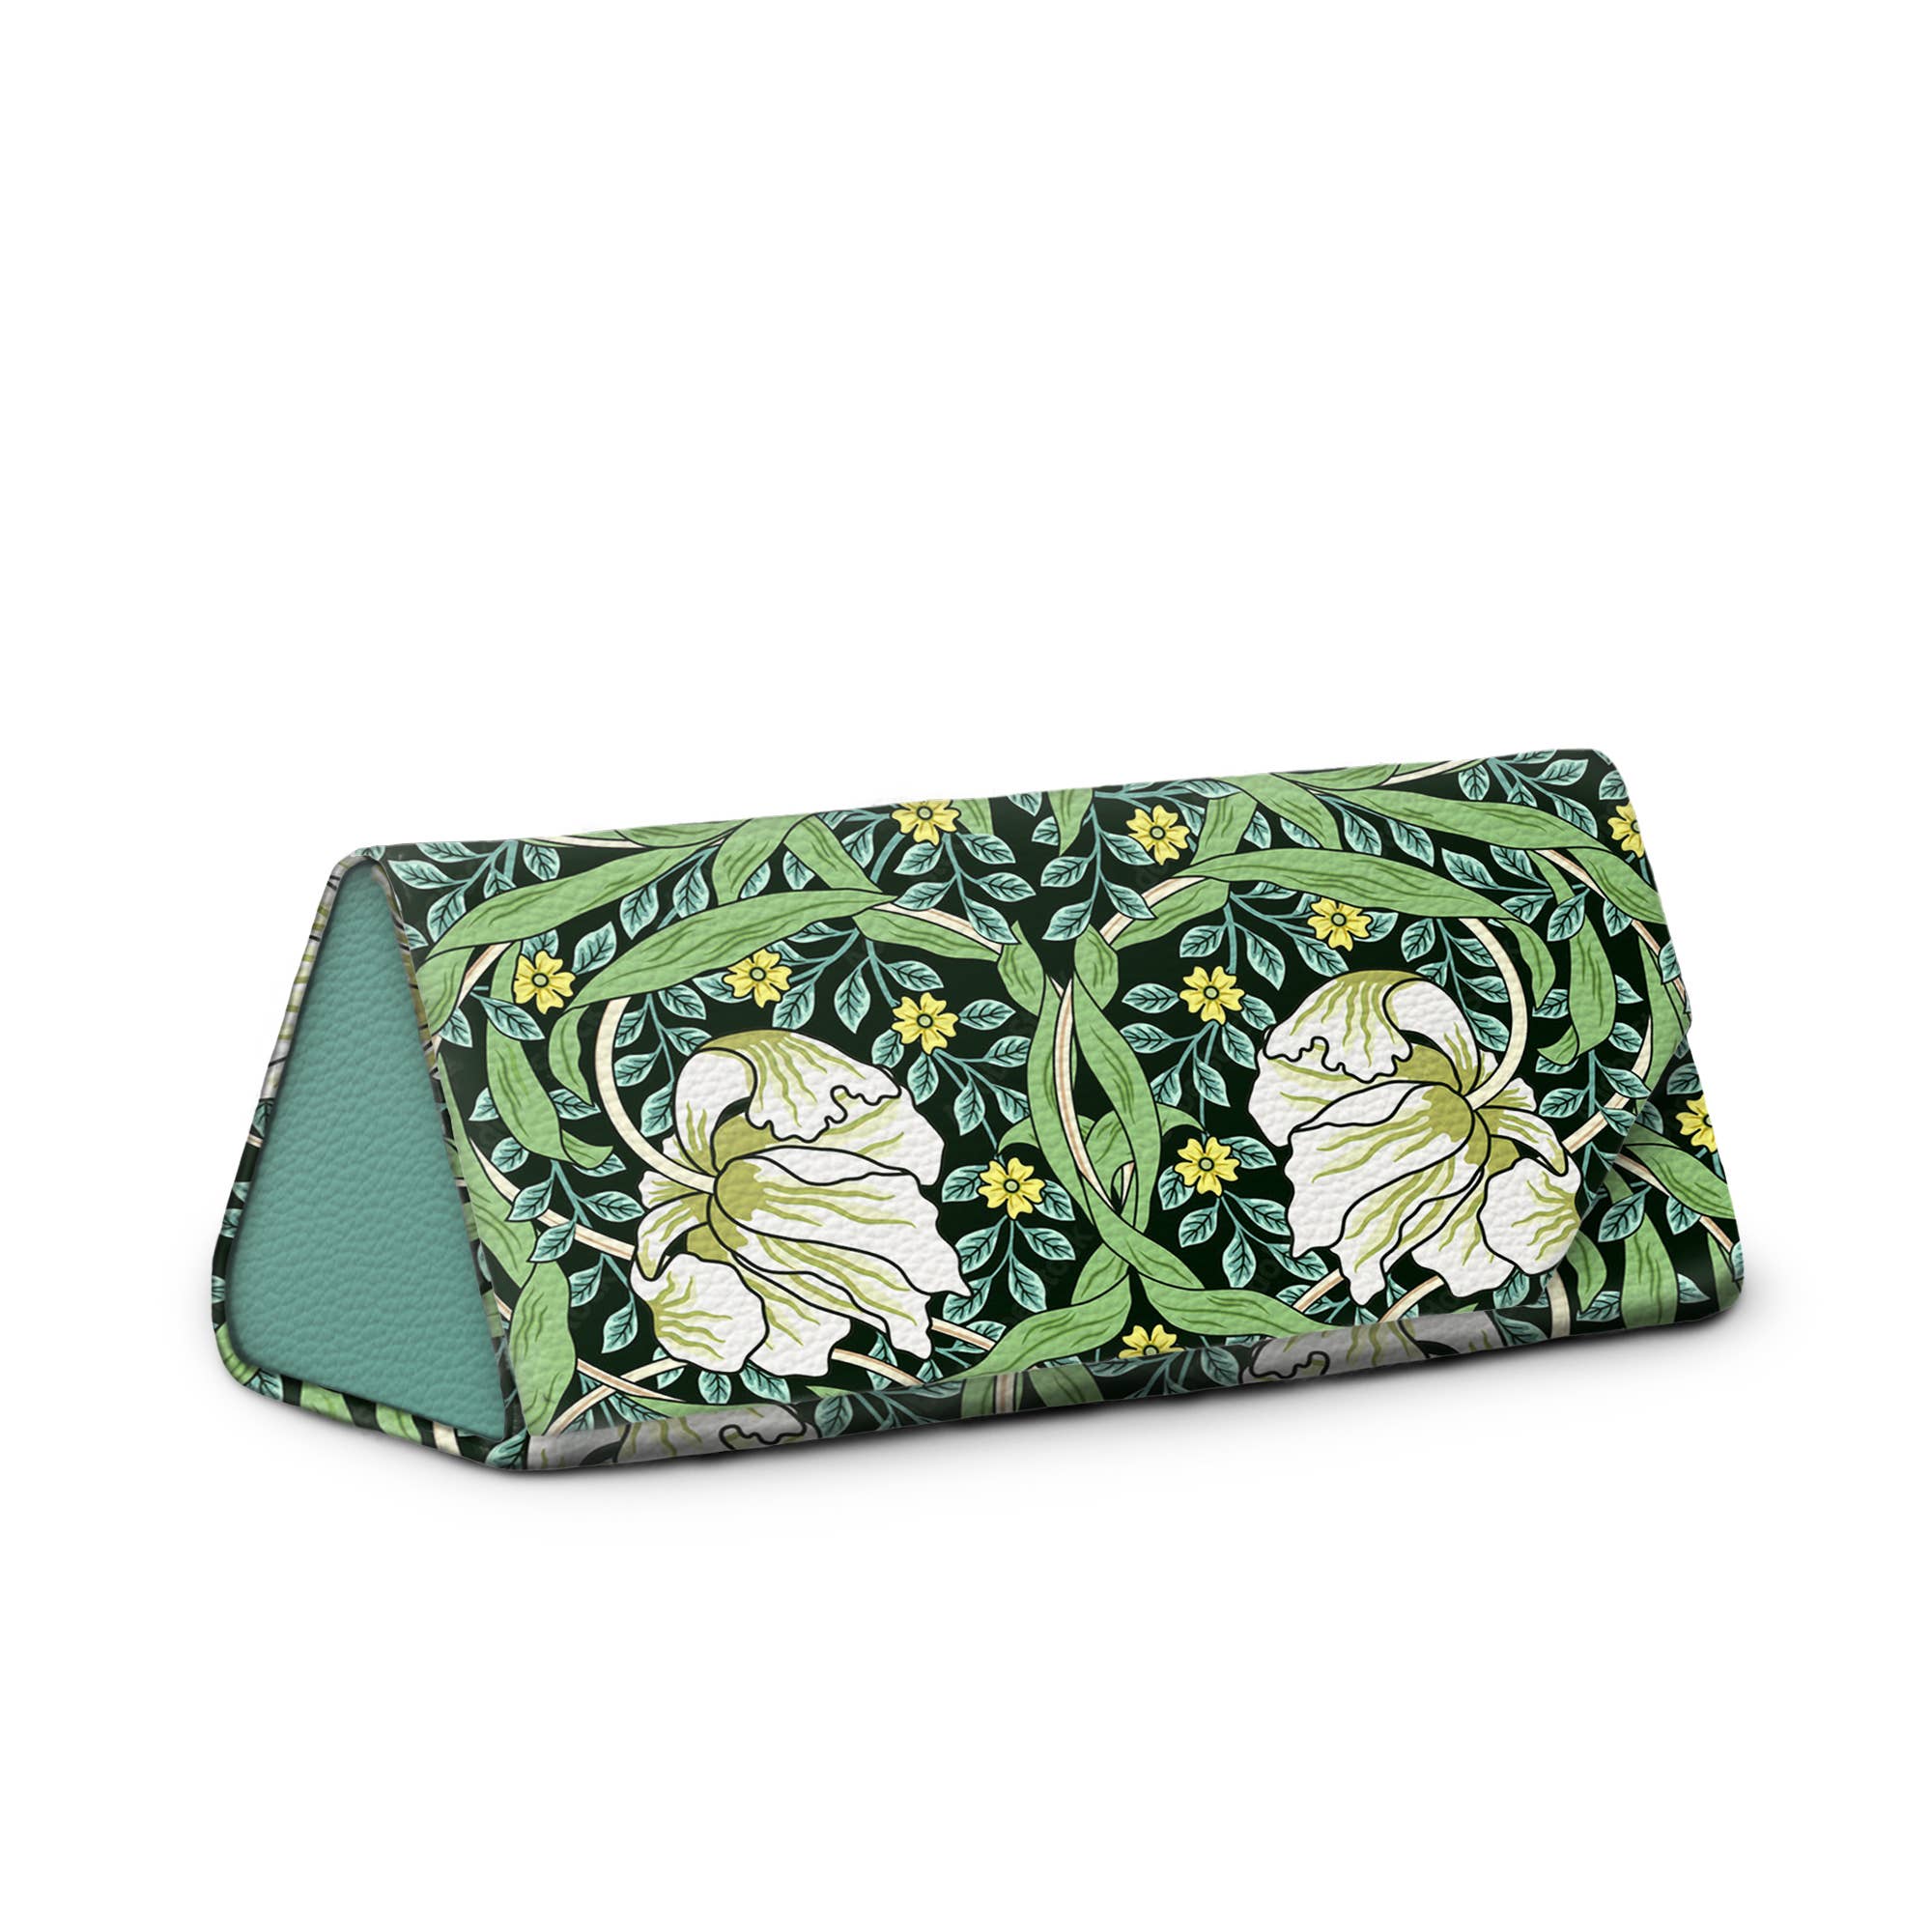 Morris - Pimpernel - Eyeglass-Sunglass Case - Out of the Blue